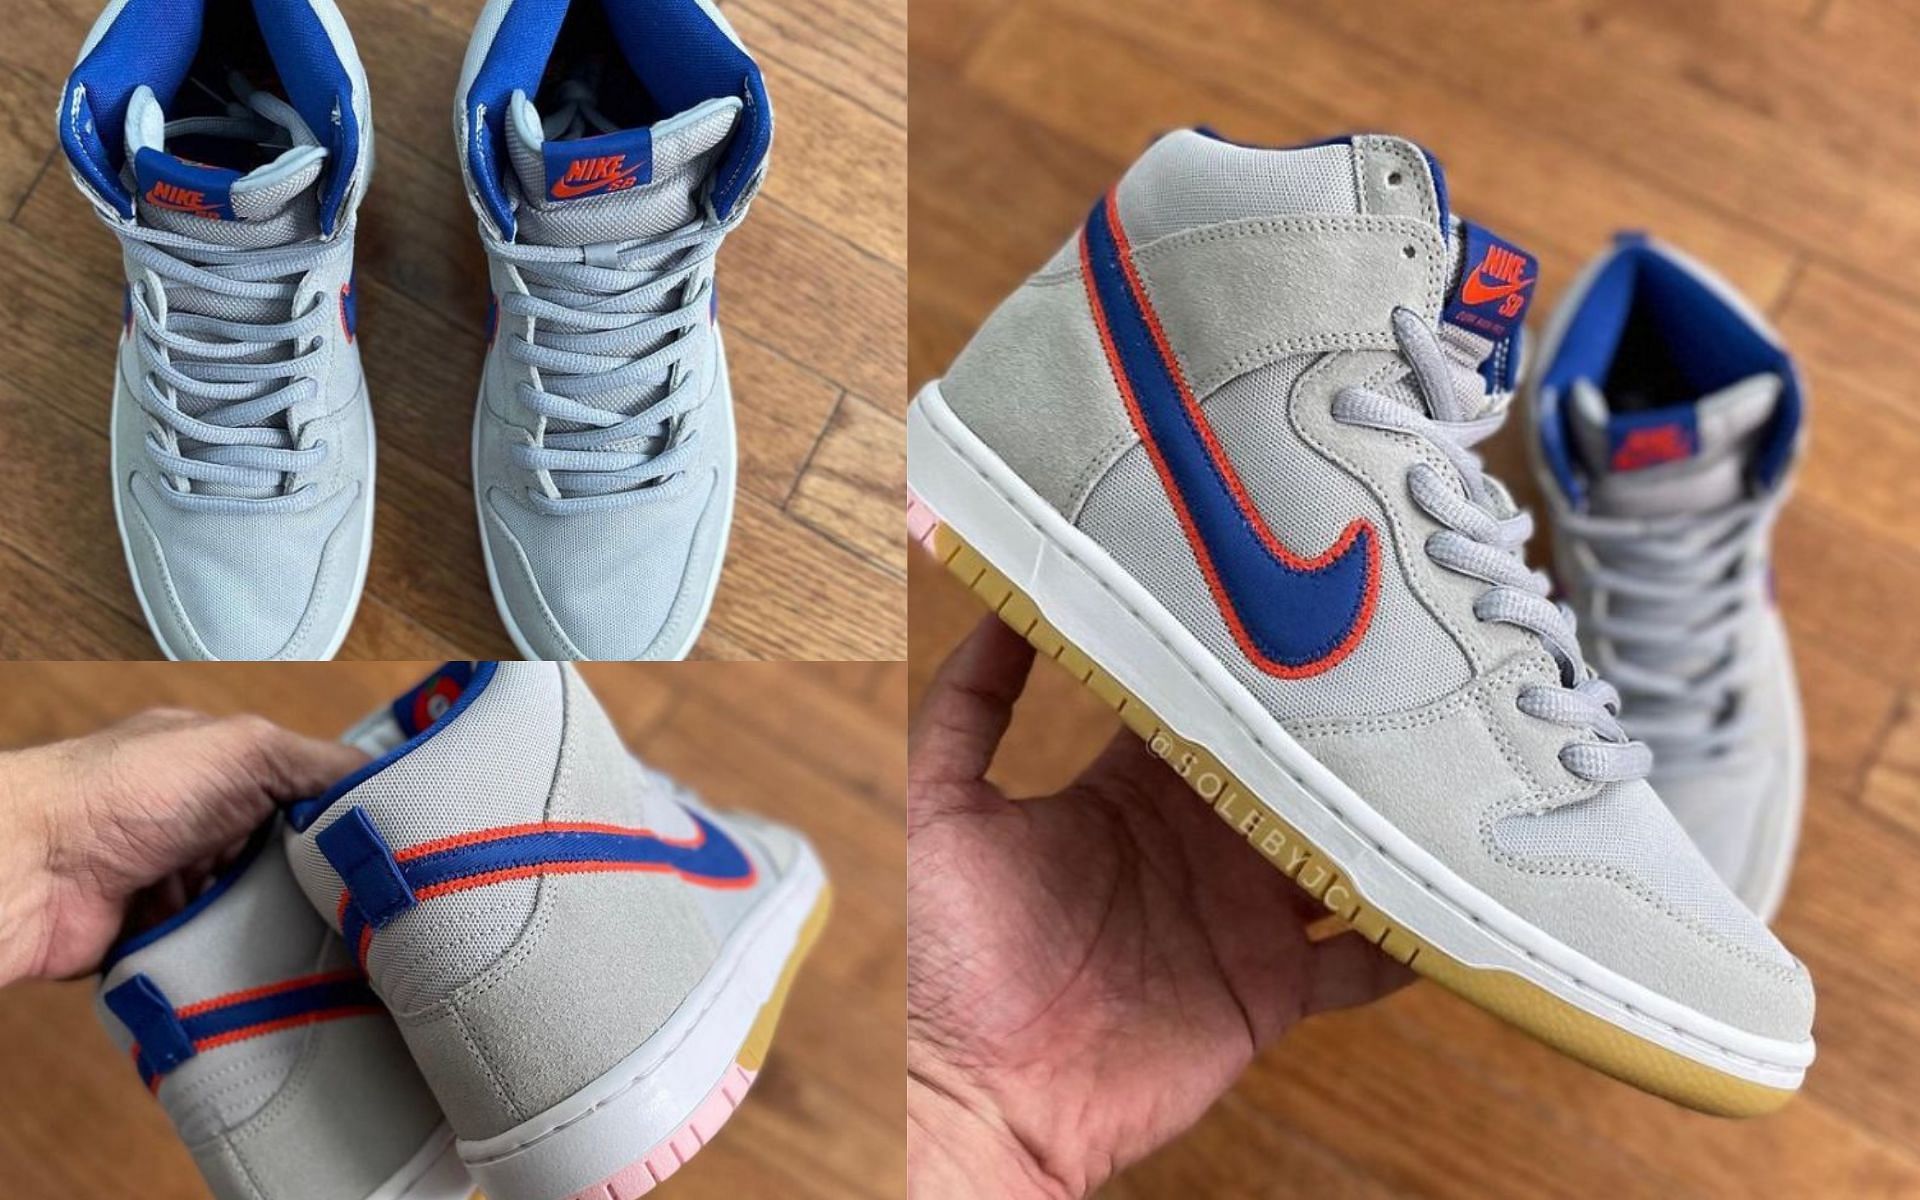 Nike SB Dunk High: All you need to know about the “New York Mets